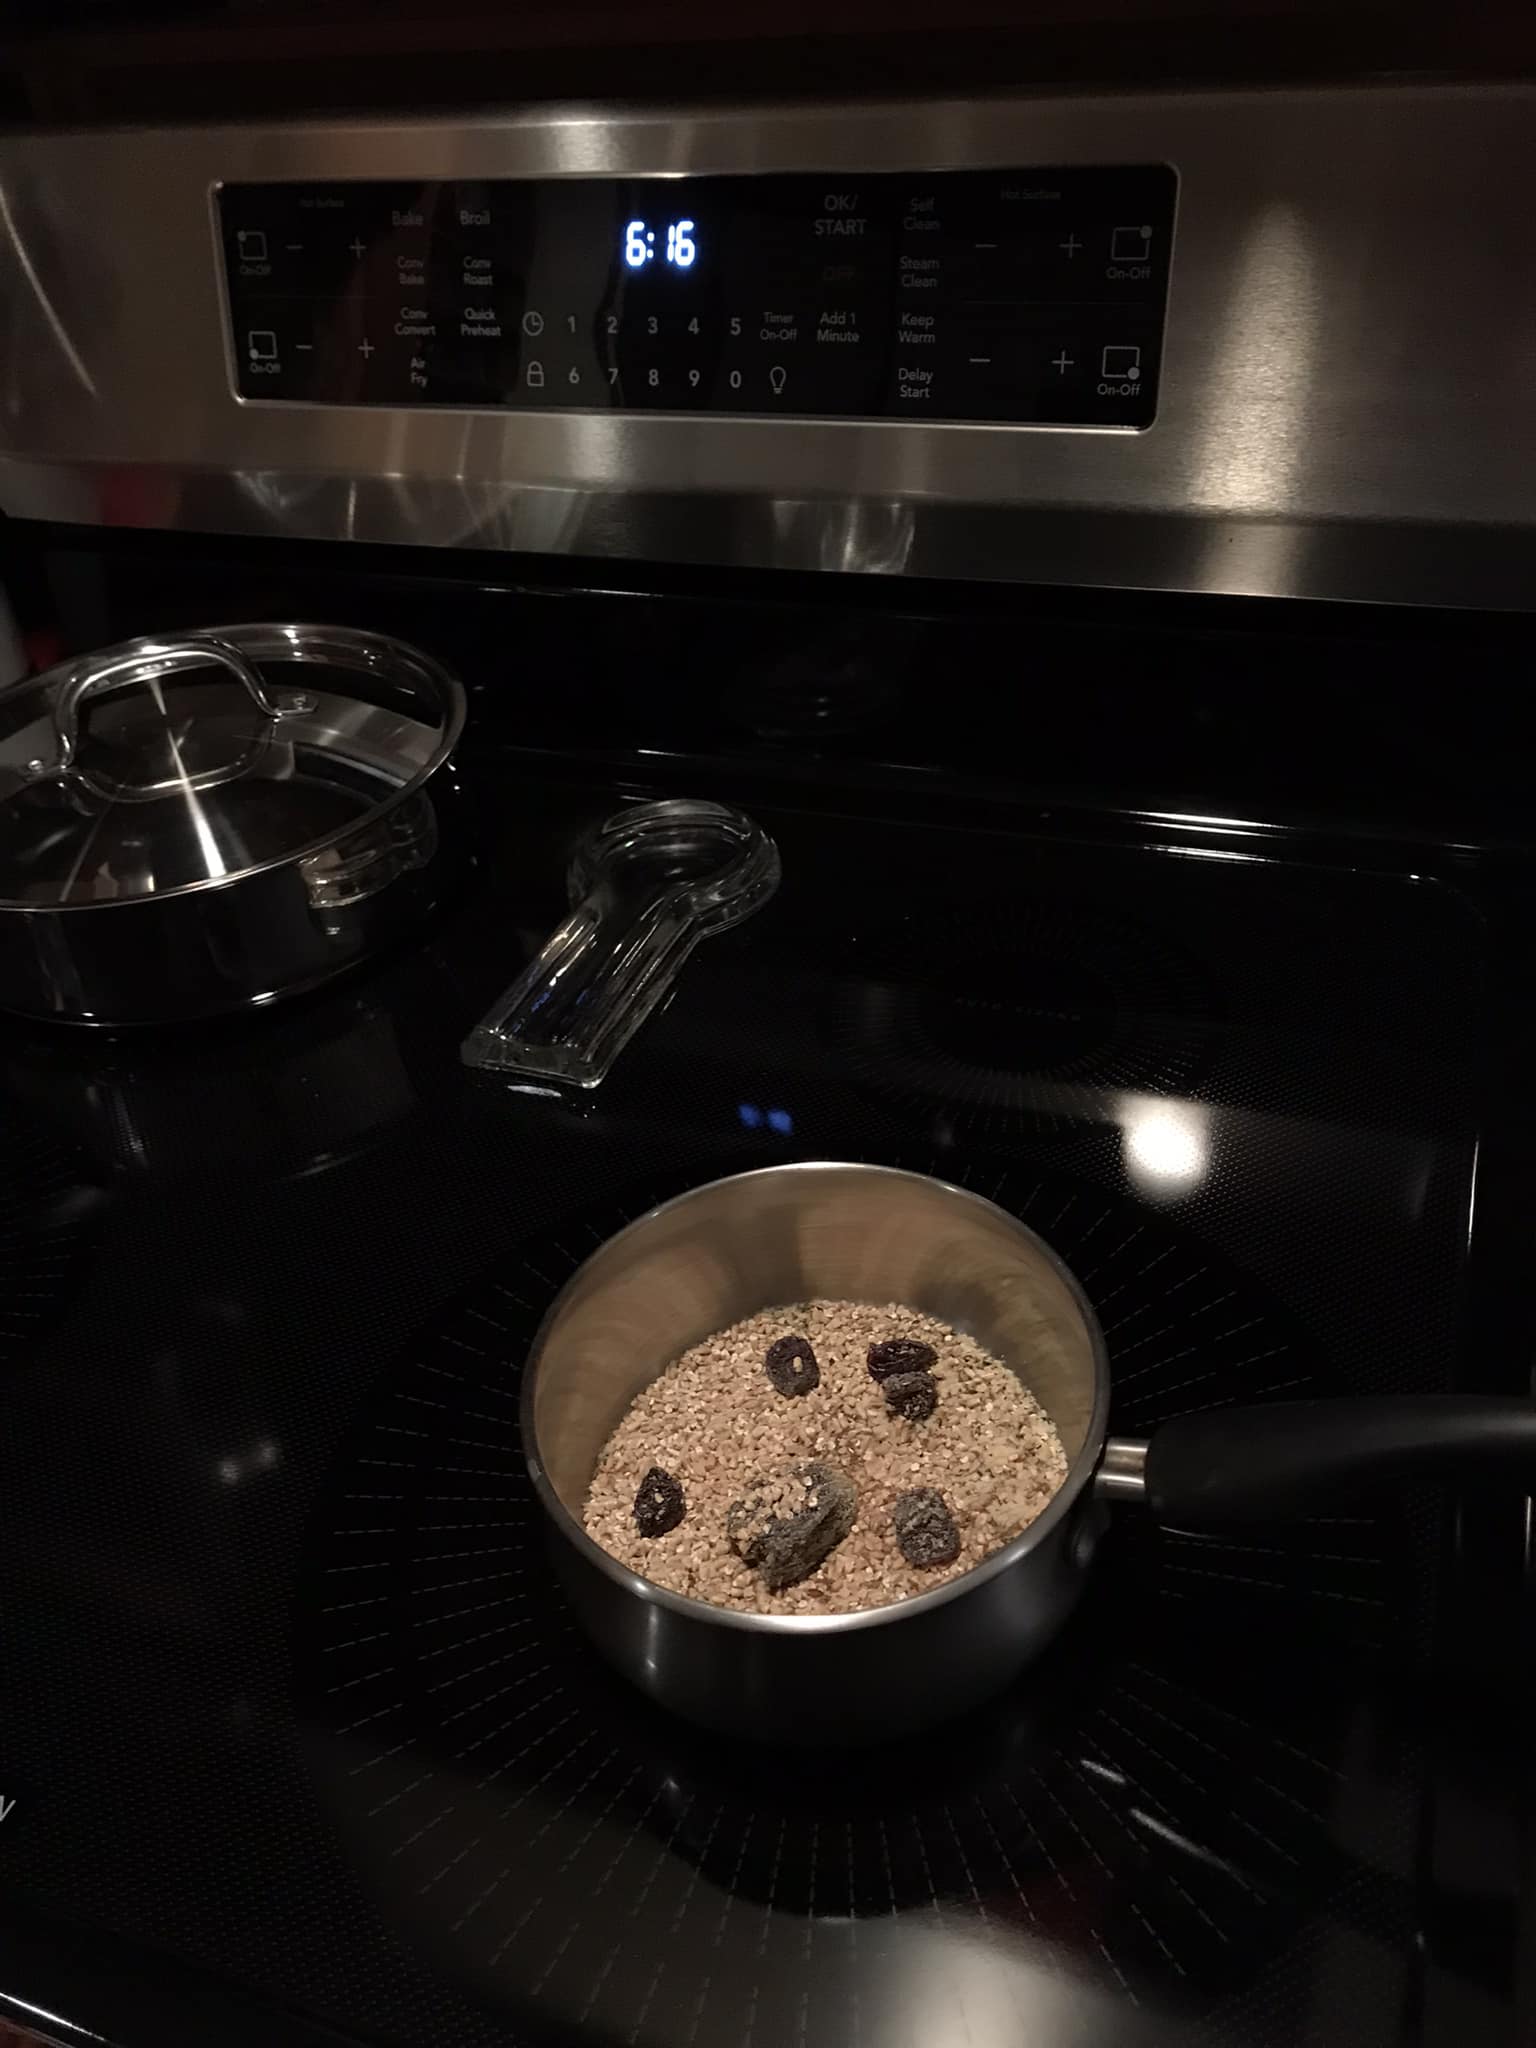 http://www.dialectrix.com/images/Induction-Oatmeal.jpg